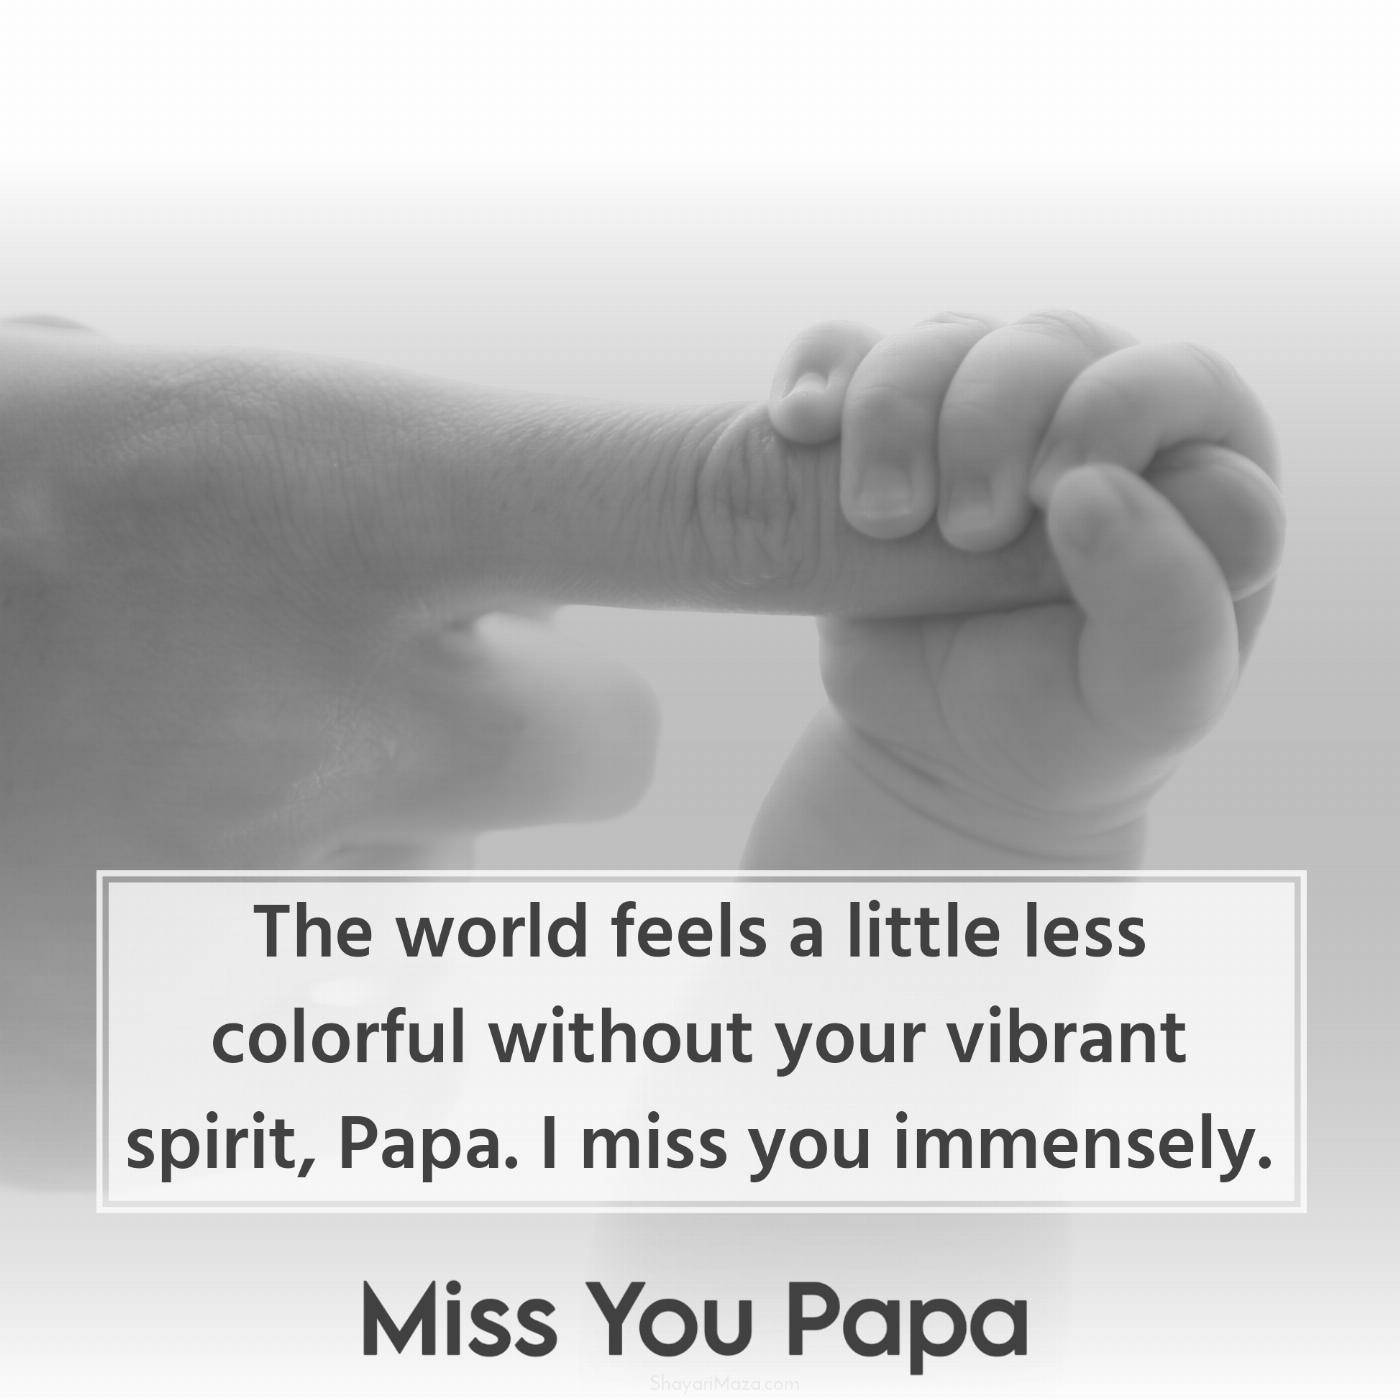 The world feels a little less colorful without your vibrant spirit Papa